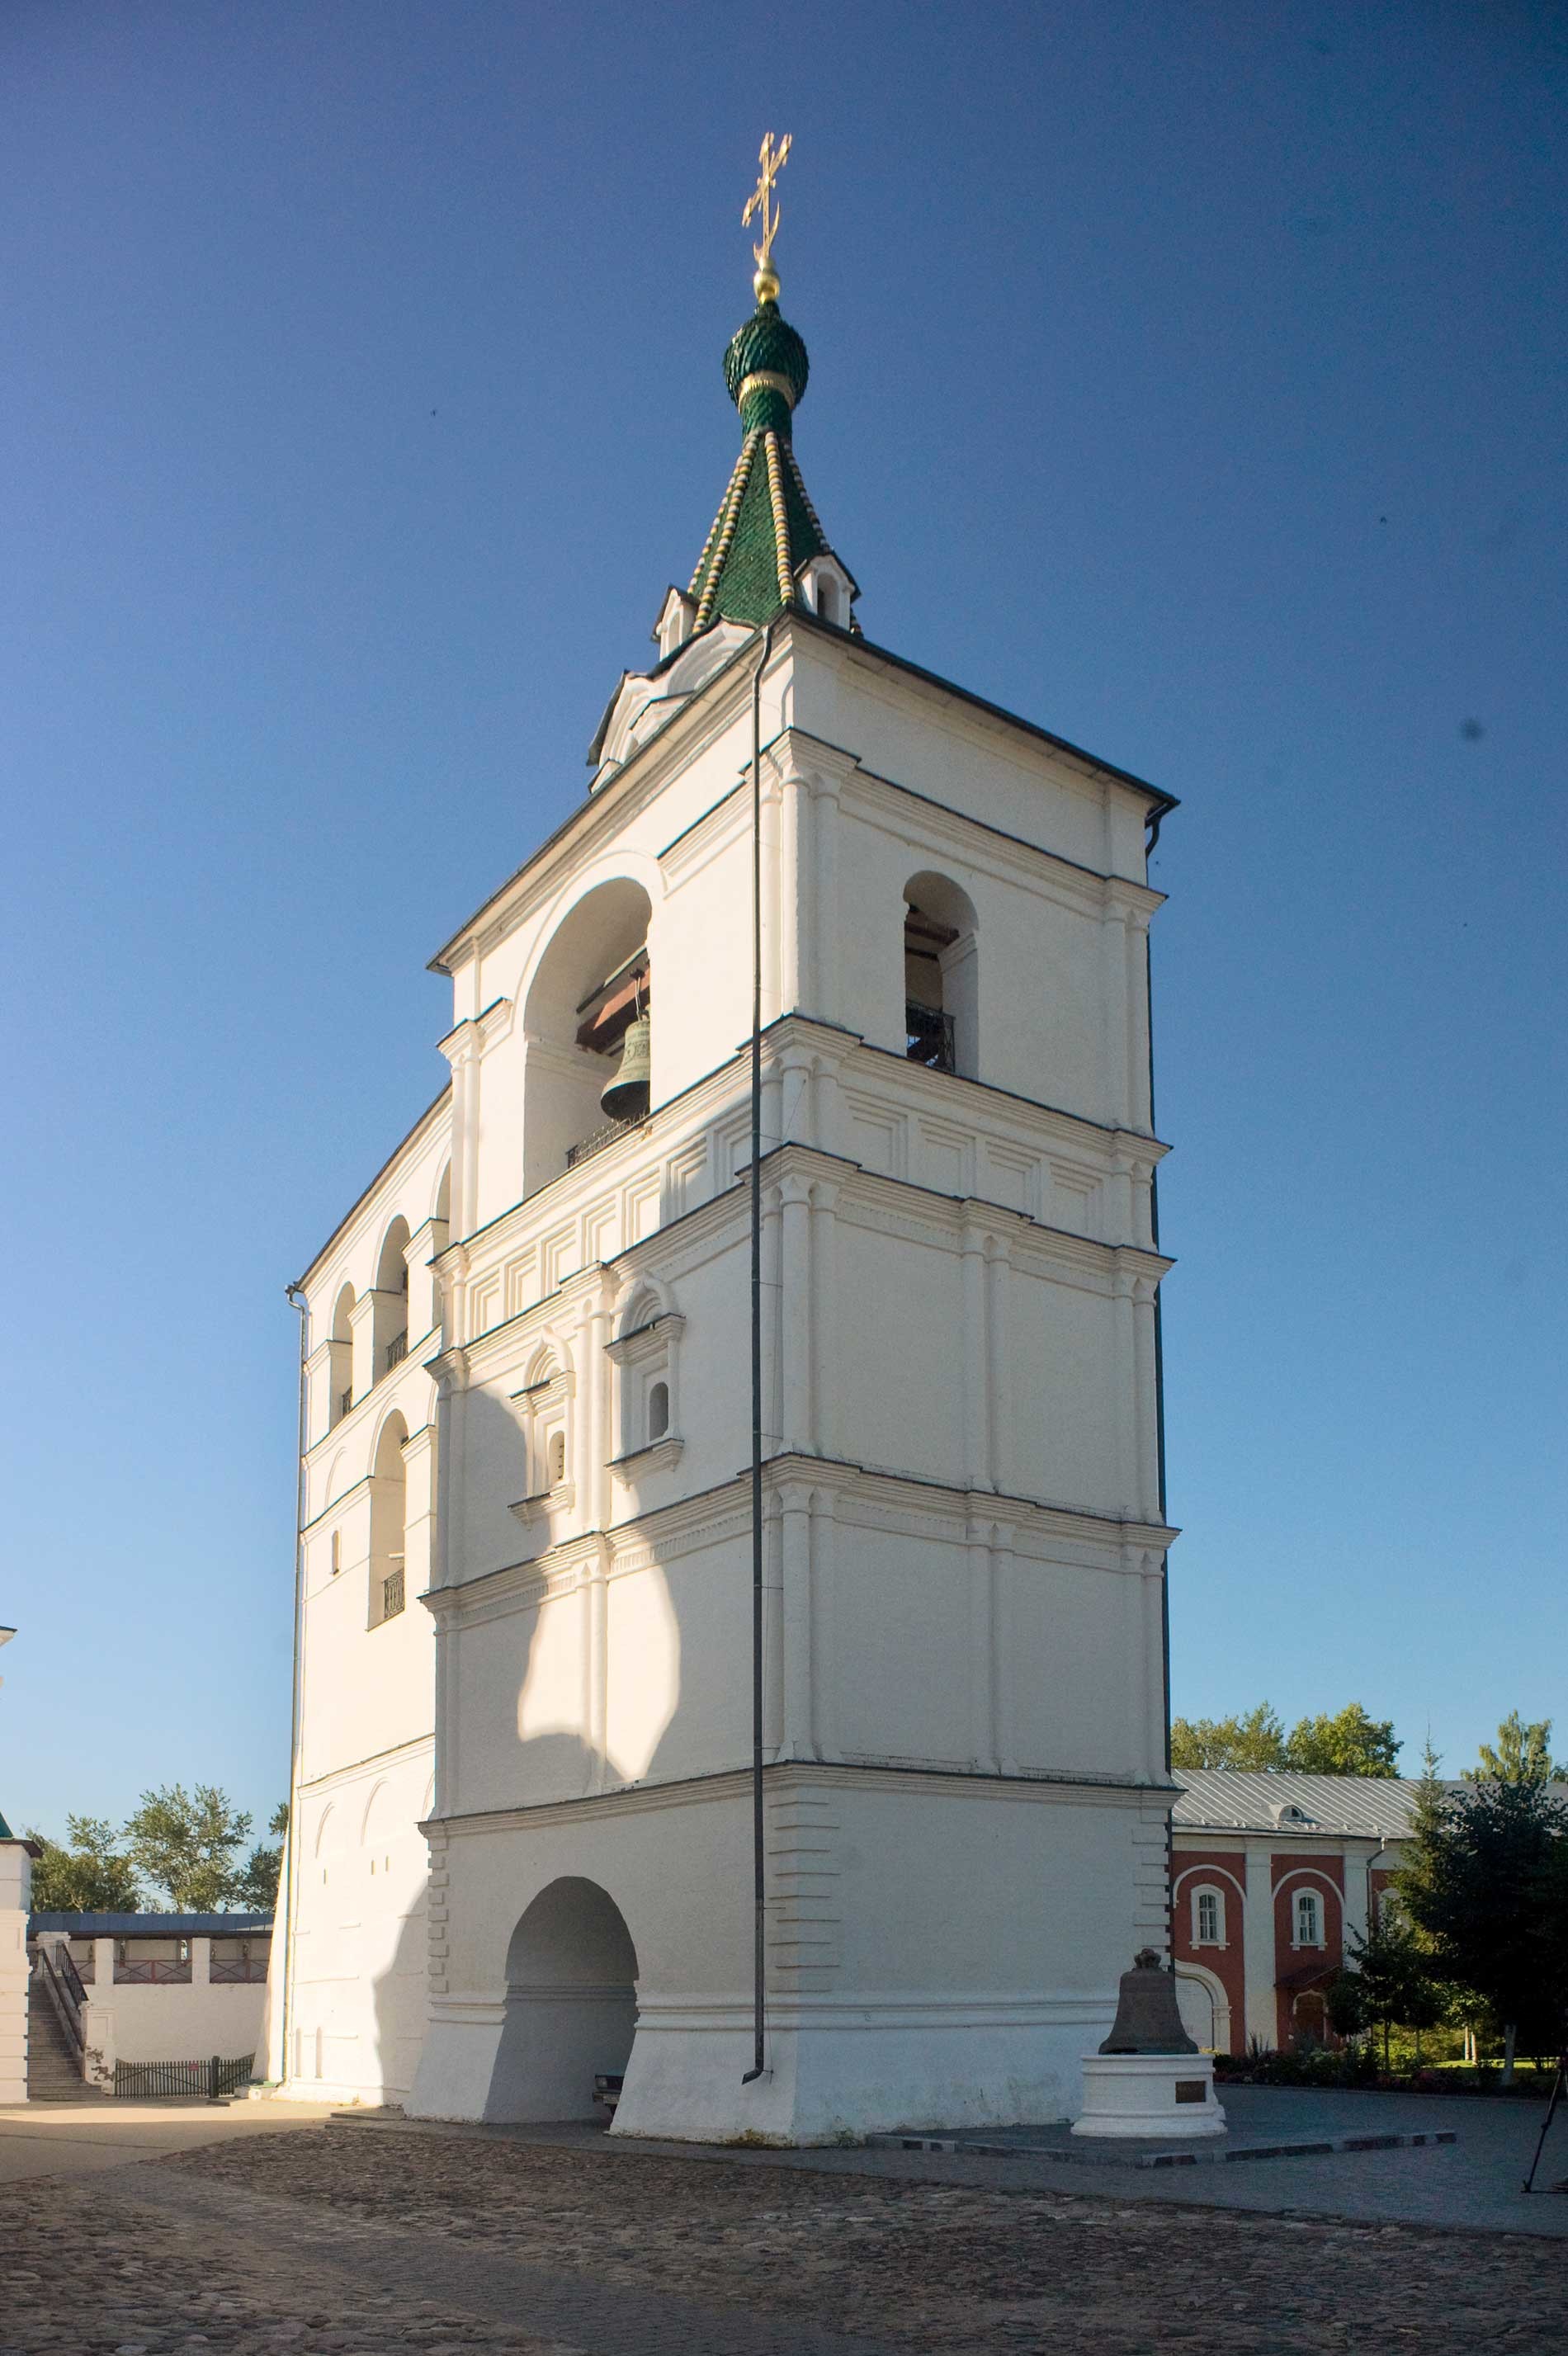 Trinity-Ipatiev Monastery. Cathedral bell tower, northeast view. Aug. 13, 2017.